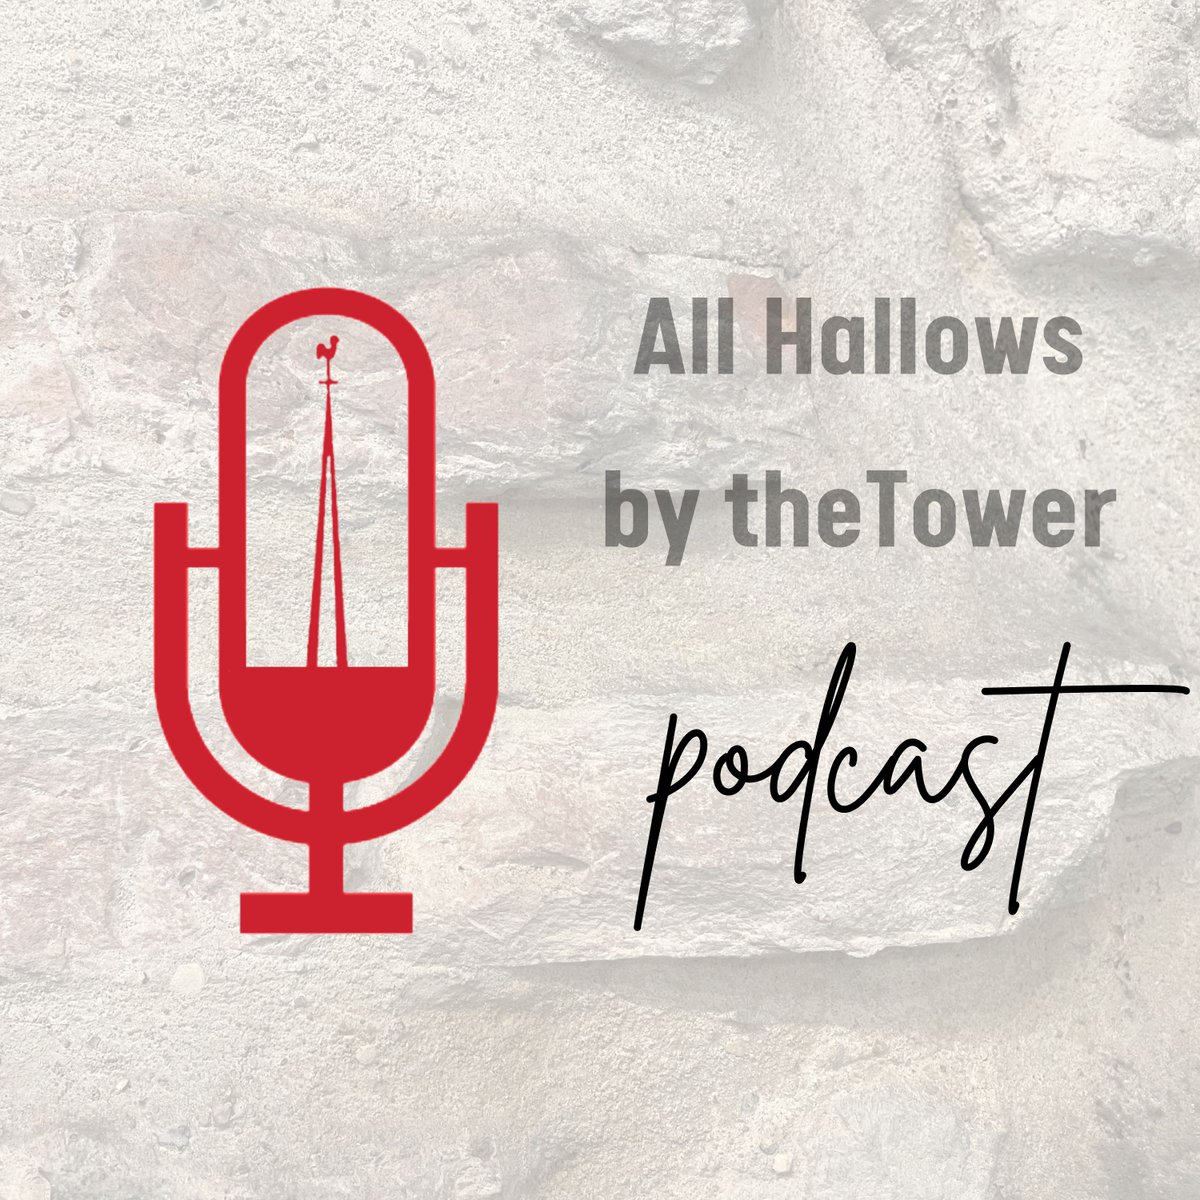 Podcast Episode 3 is now out! 'The Saddest Sight; Pepys and The Great Fire' Search All Hallows by the Tower on Spotify, or use link: shorturl.at/efpqW